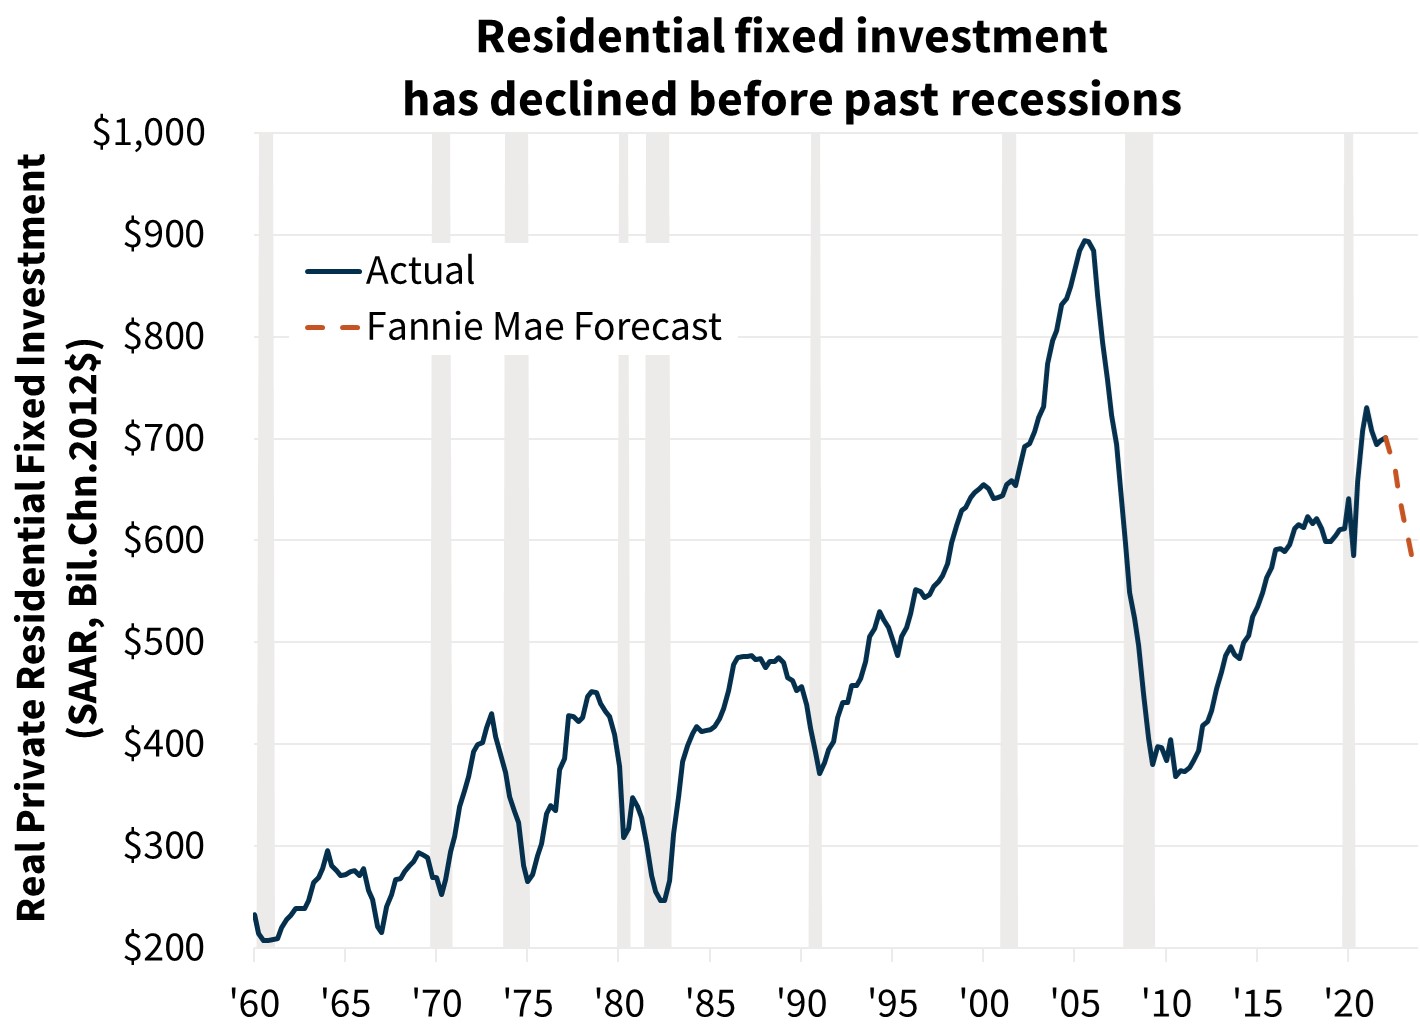  Residential fixed investment has declined before past recessions 